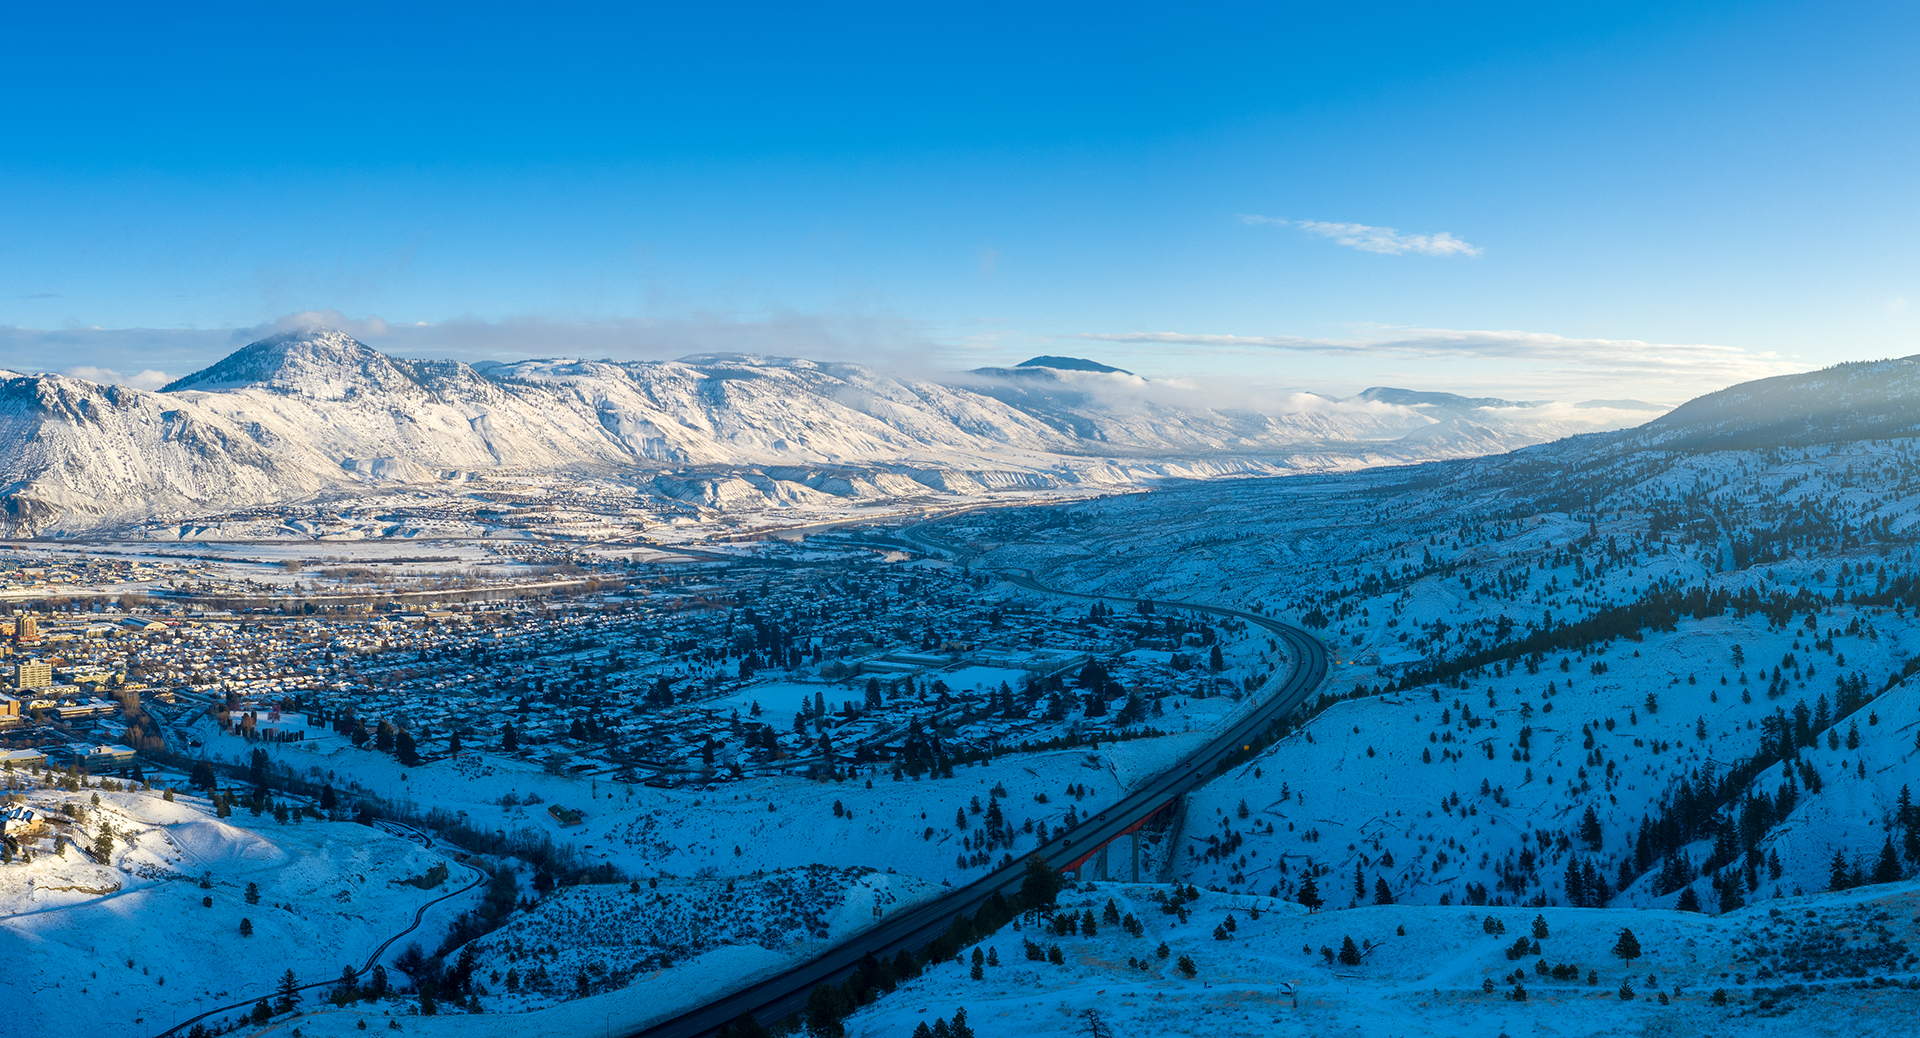 Kamloops City Aerial winding road with buildings and trees with